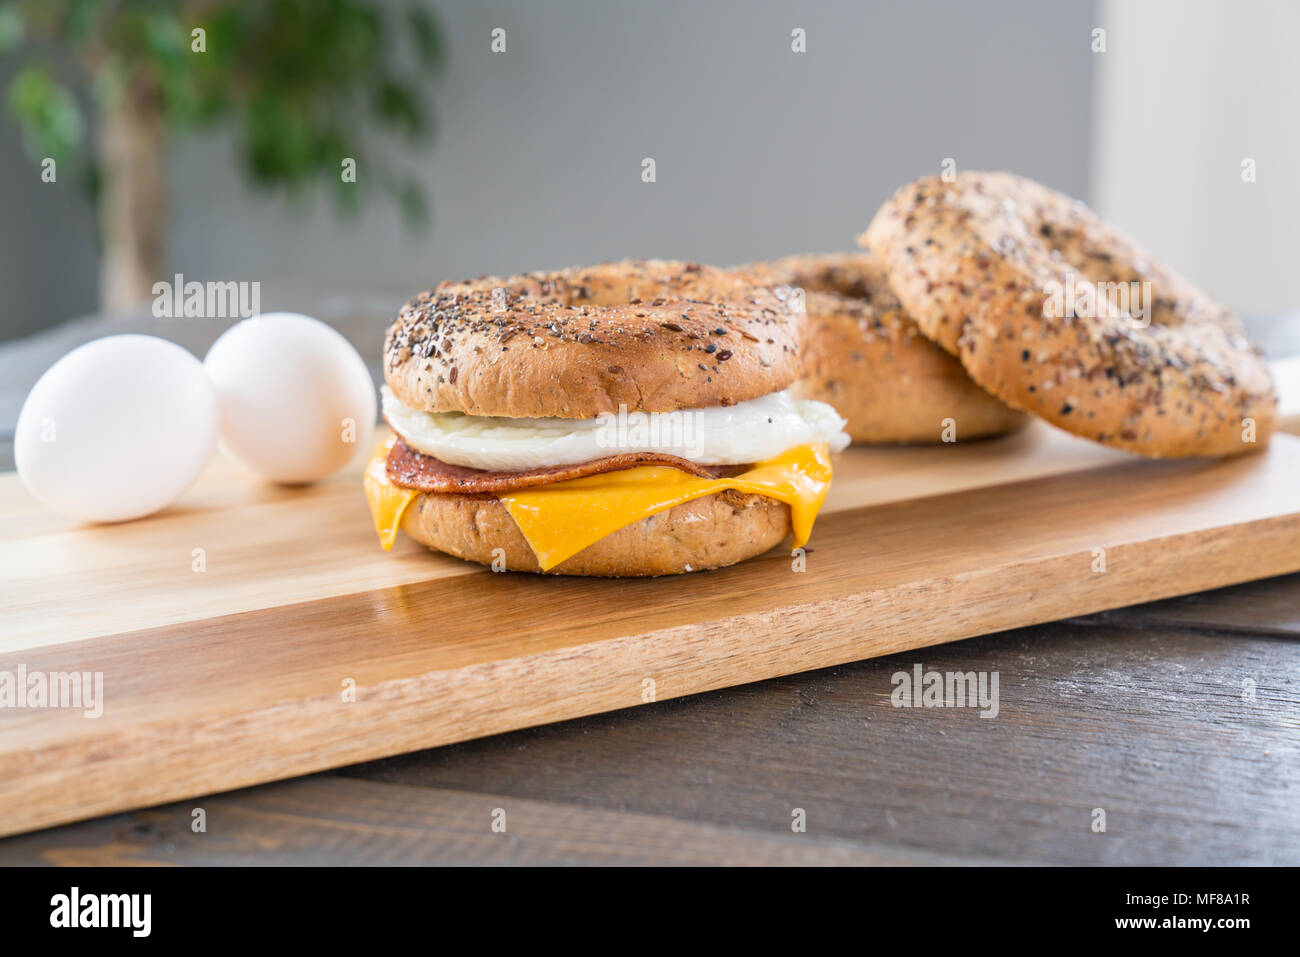 https://c8.alamy.com/comp/MF8A1R/canadian-bacon-egg-and-cheese-breakfast-sandwich-with-an-everything-bagel-on-cutting-board-MF8A1R.jpg